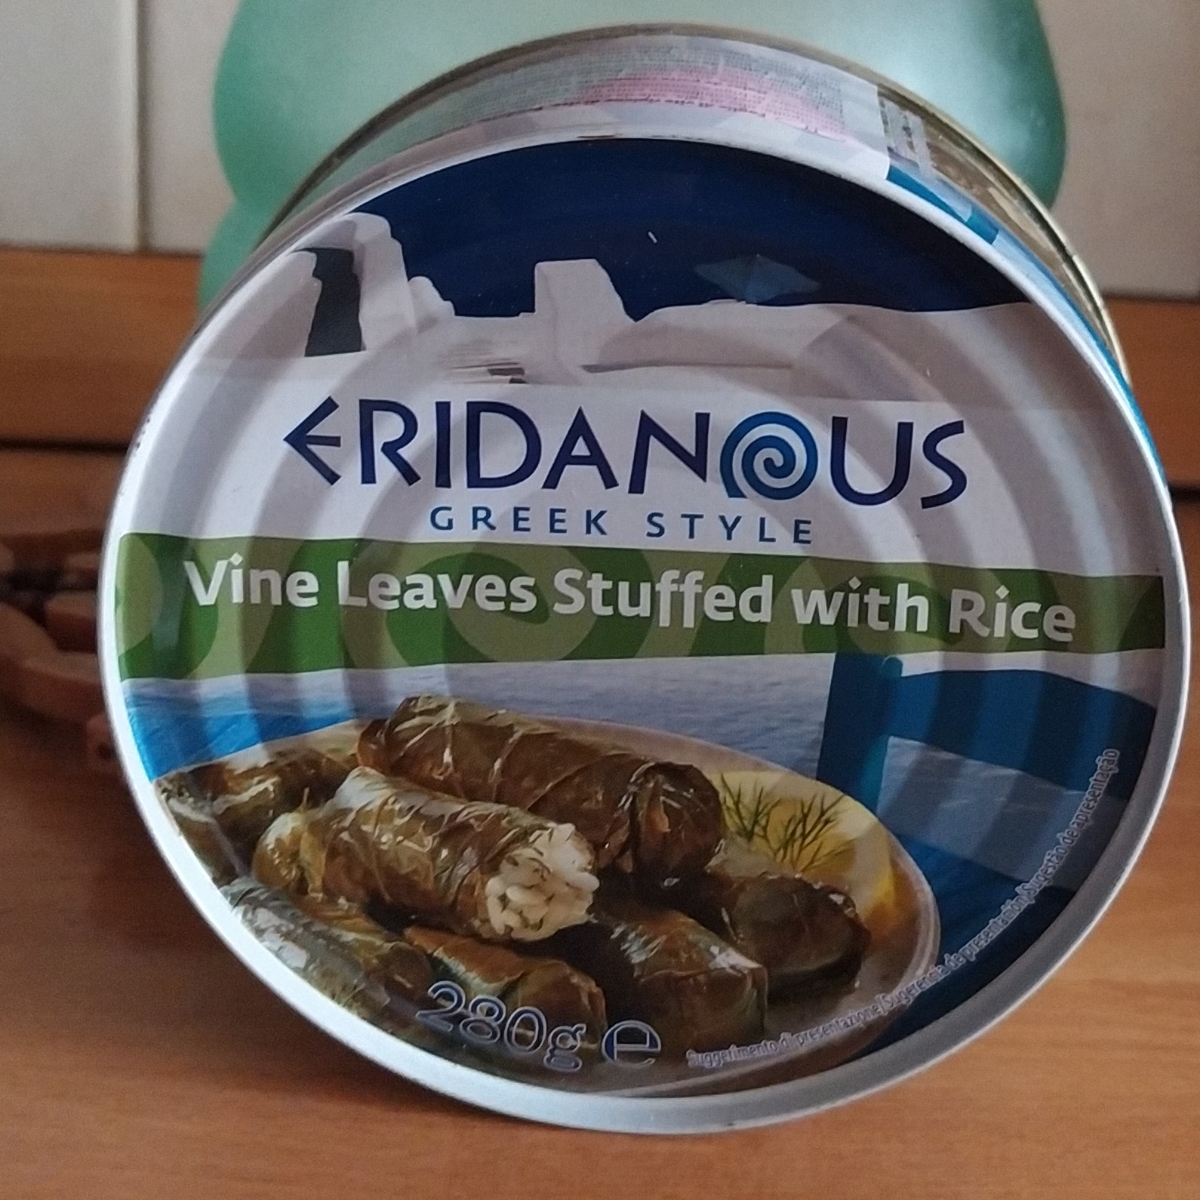 Eridanous Vine leaves stuffed with rice Review | abillion